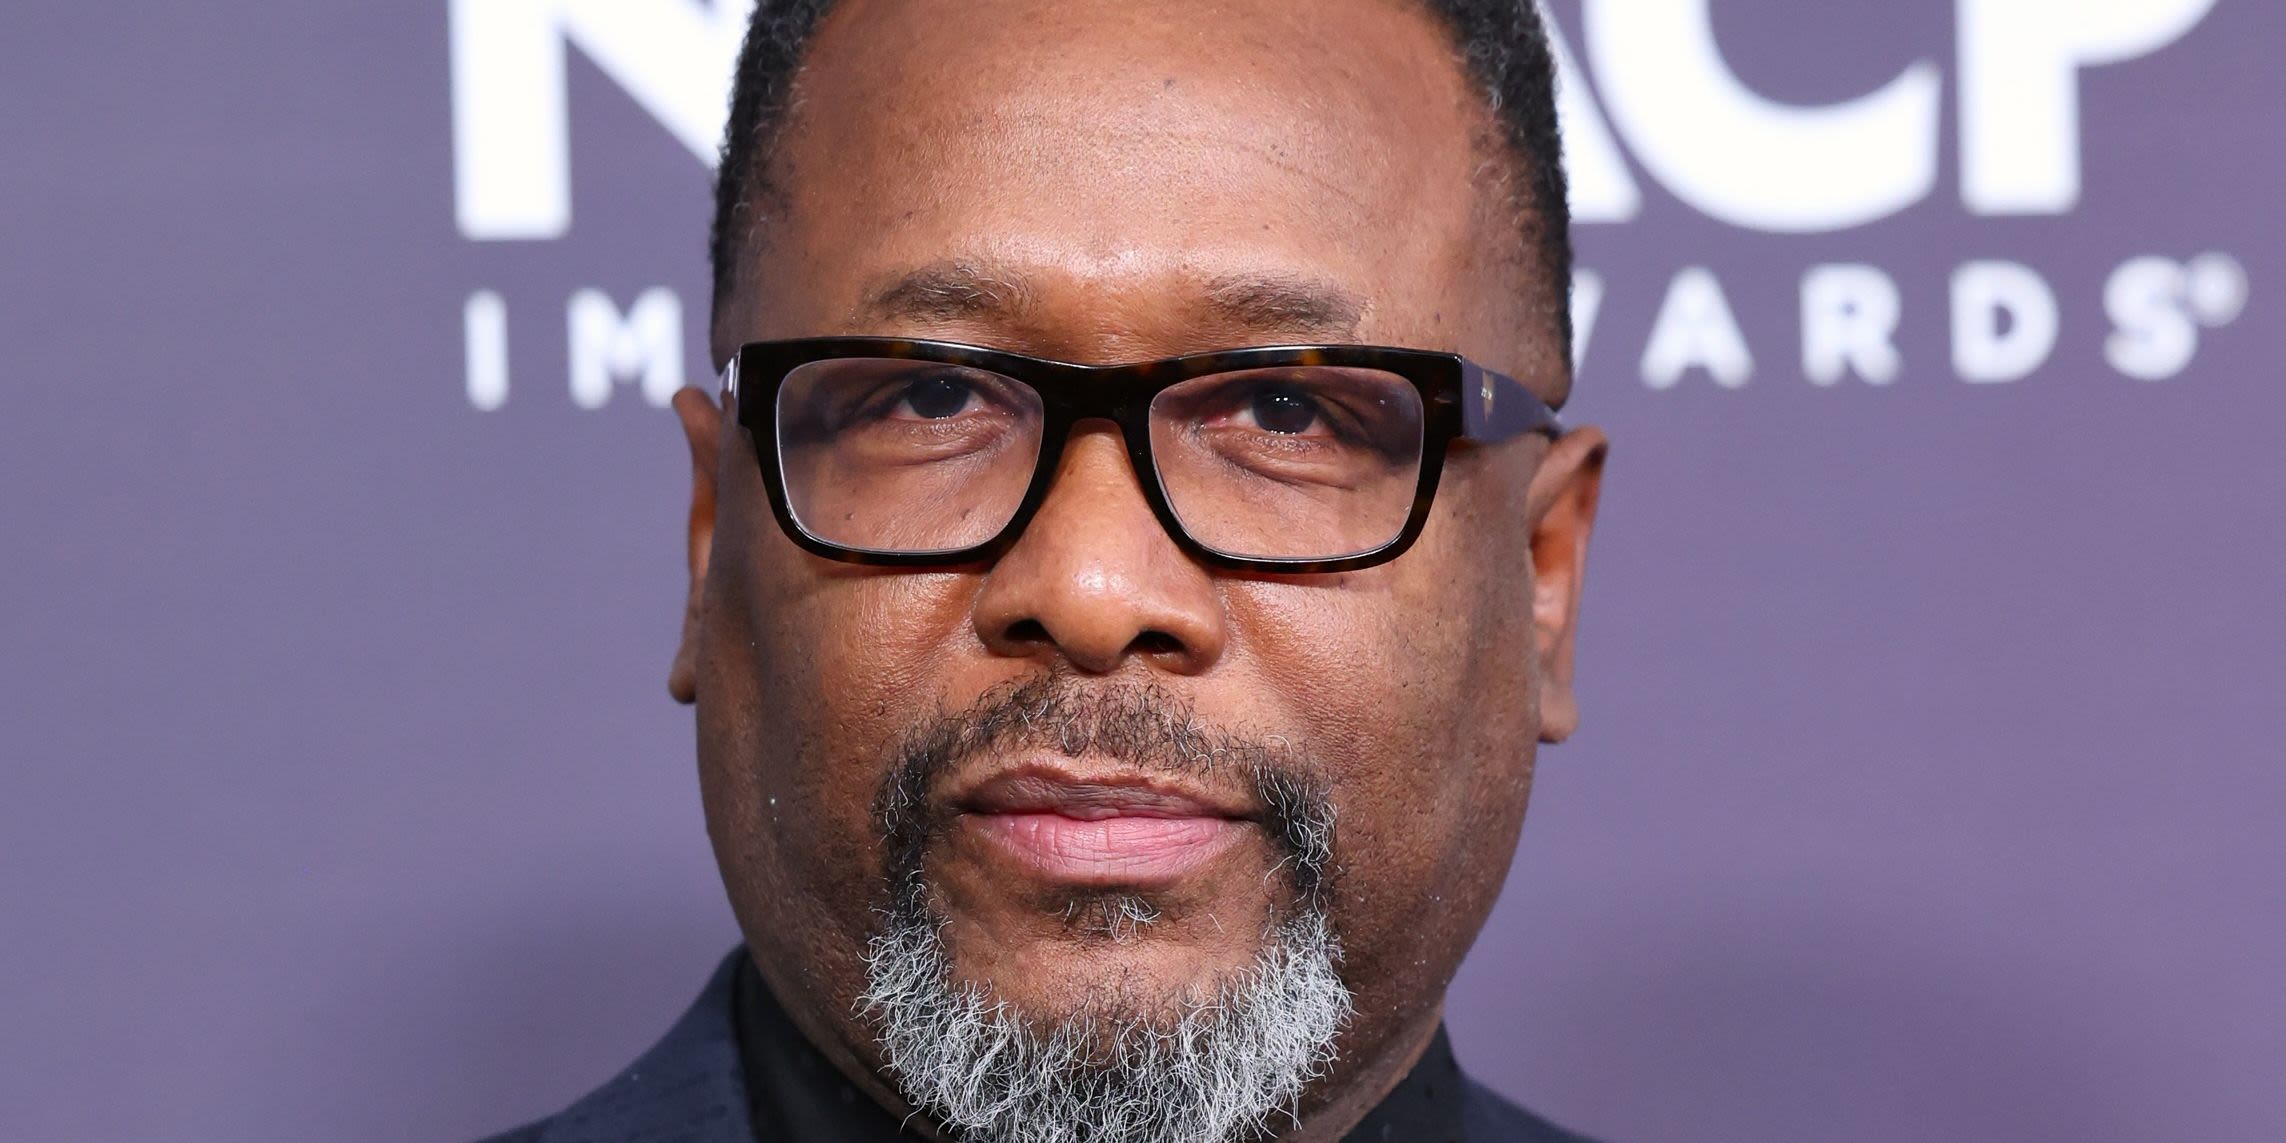 Suits star Wendell Pierce accuses landlord of racism for rejecting flat application